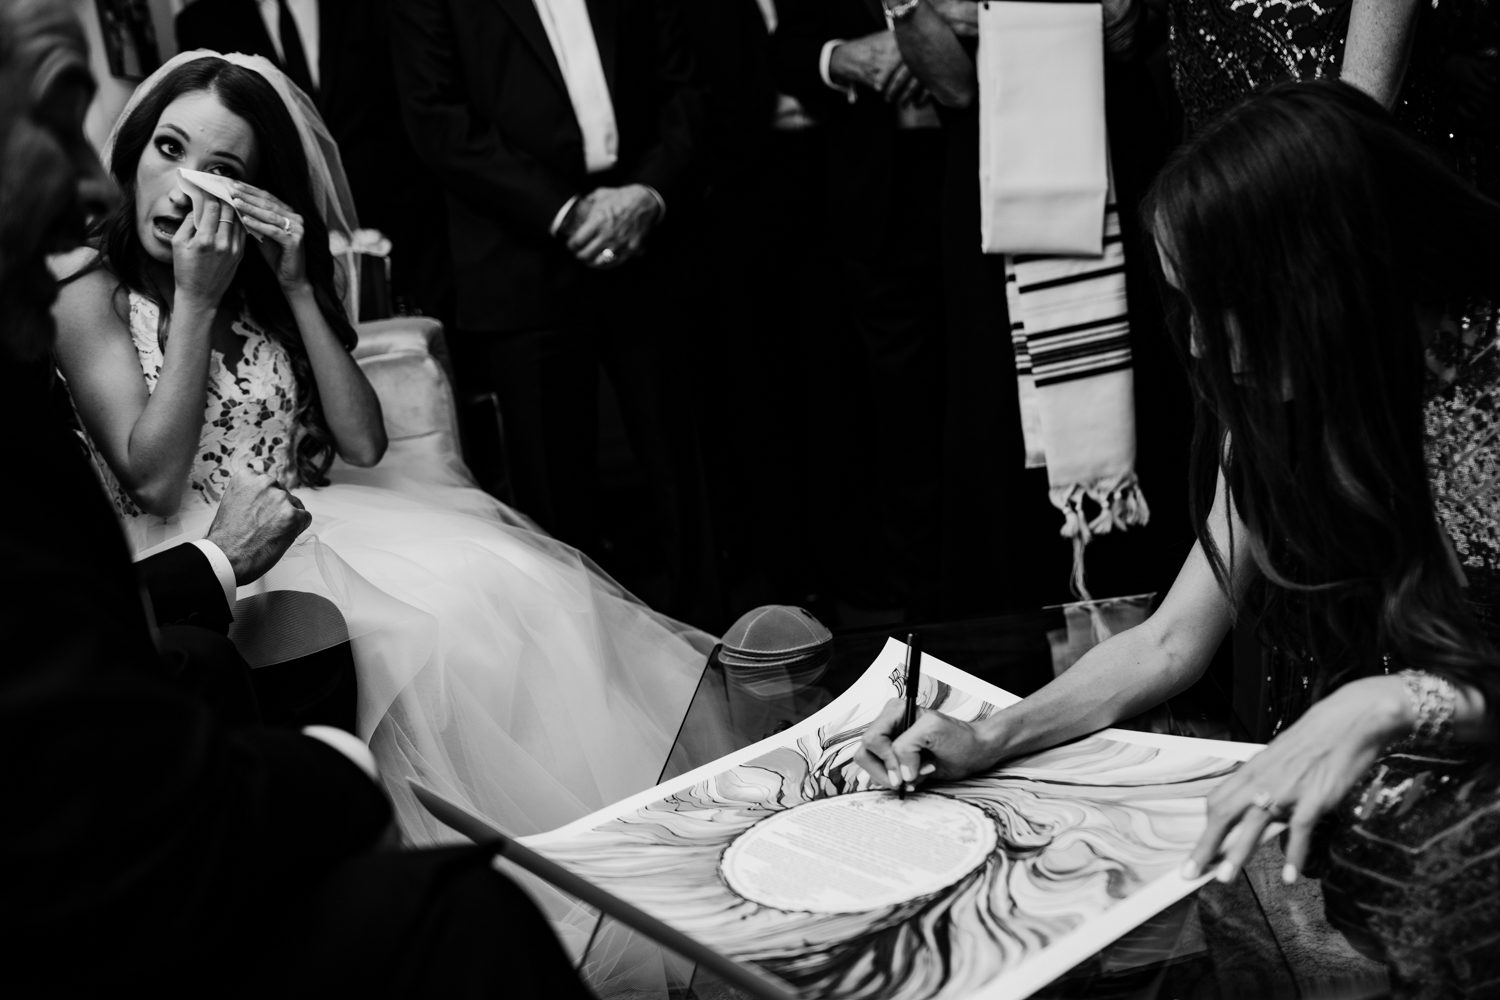 A bride signing her wedding vows in front of a group of people.